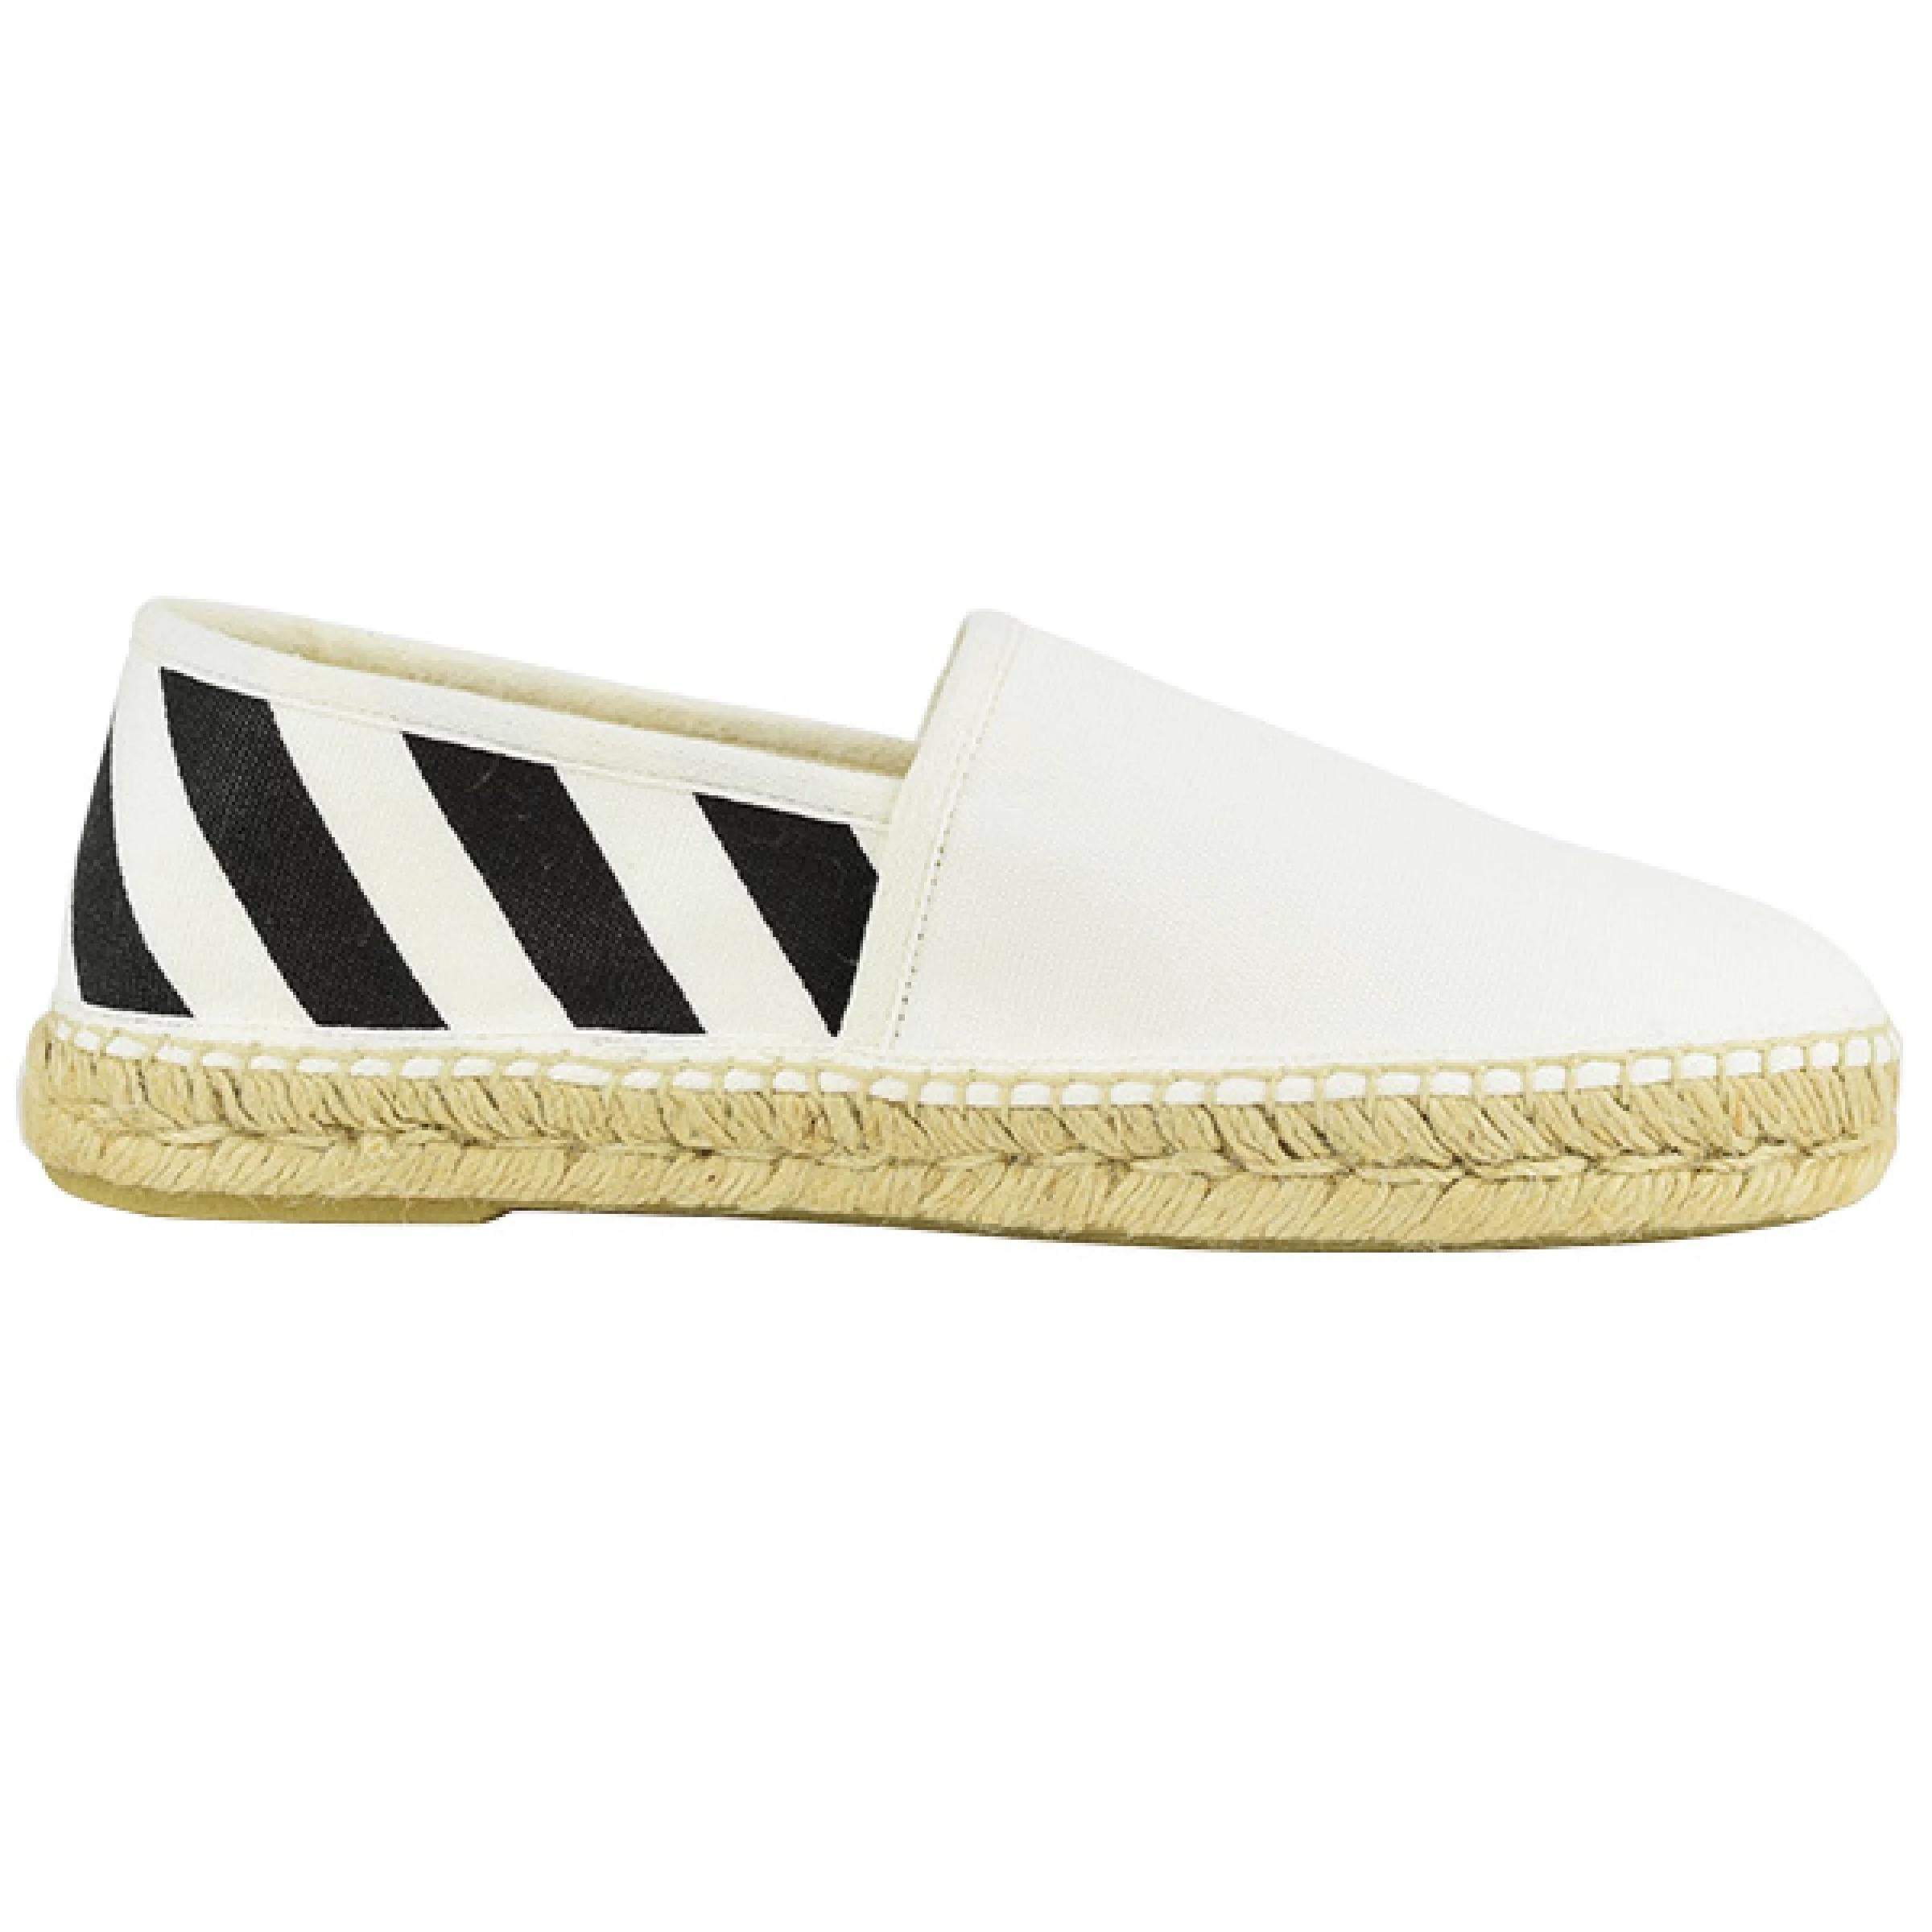 NEW Off-White Virgil Abloh White Striped Espadrilles Shoes For Sale 1